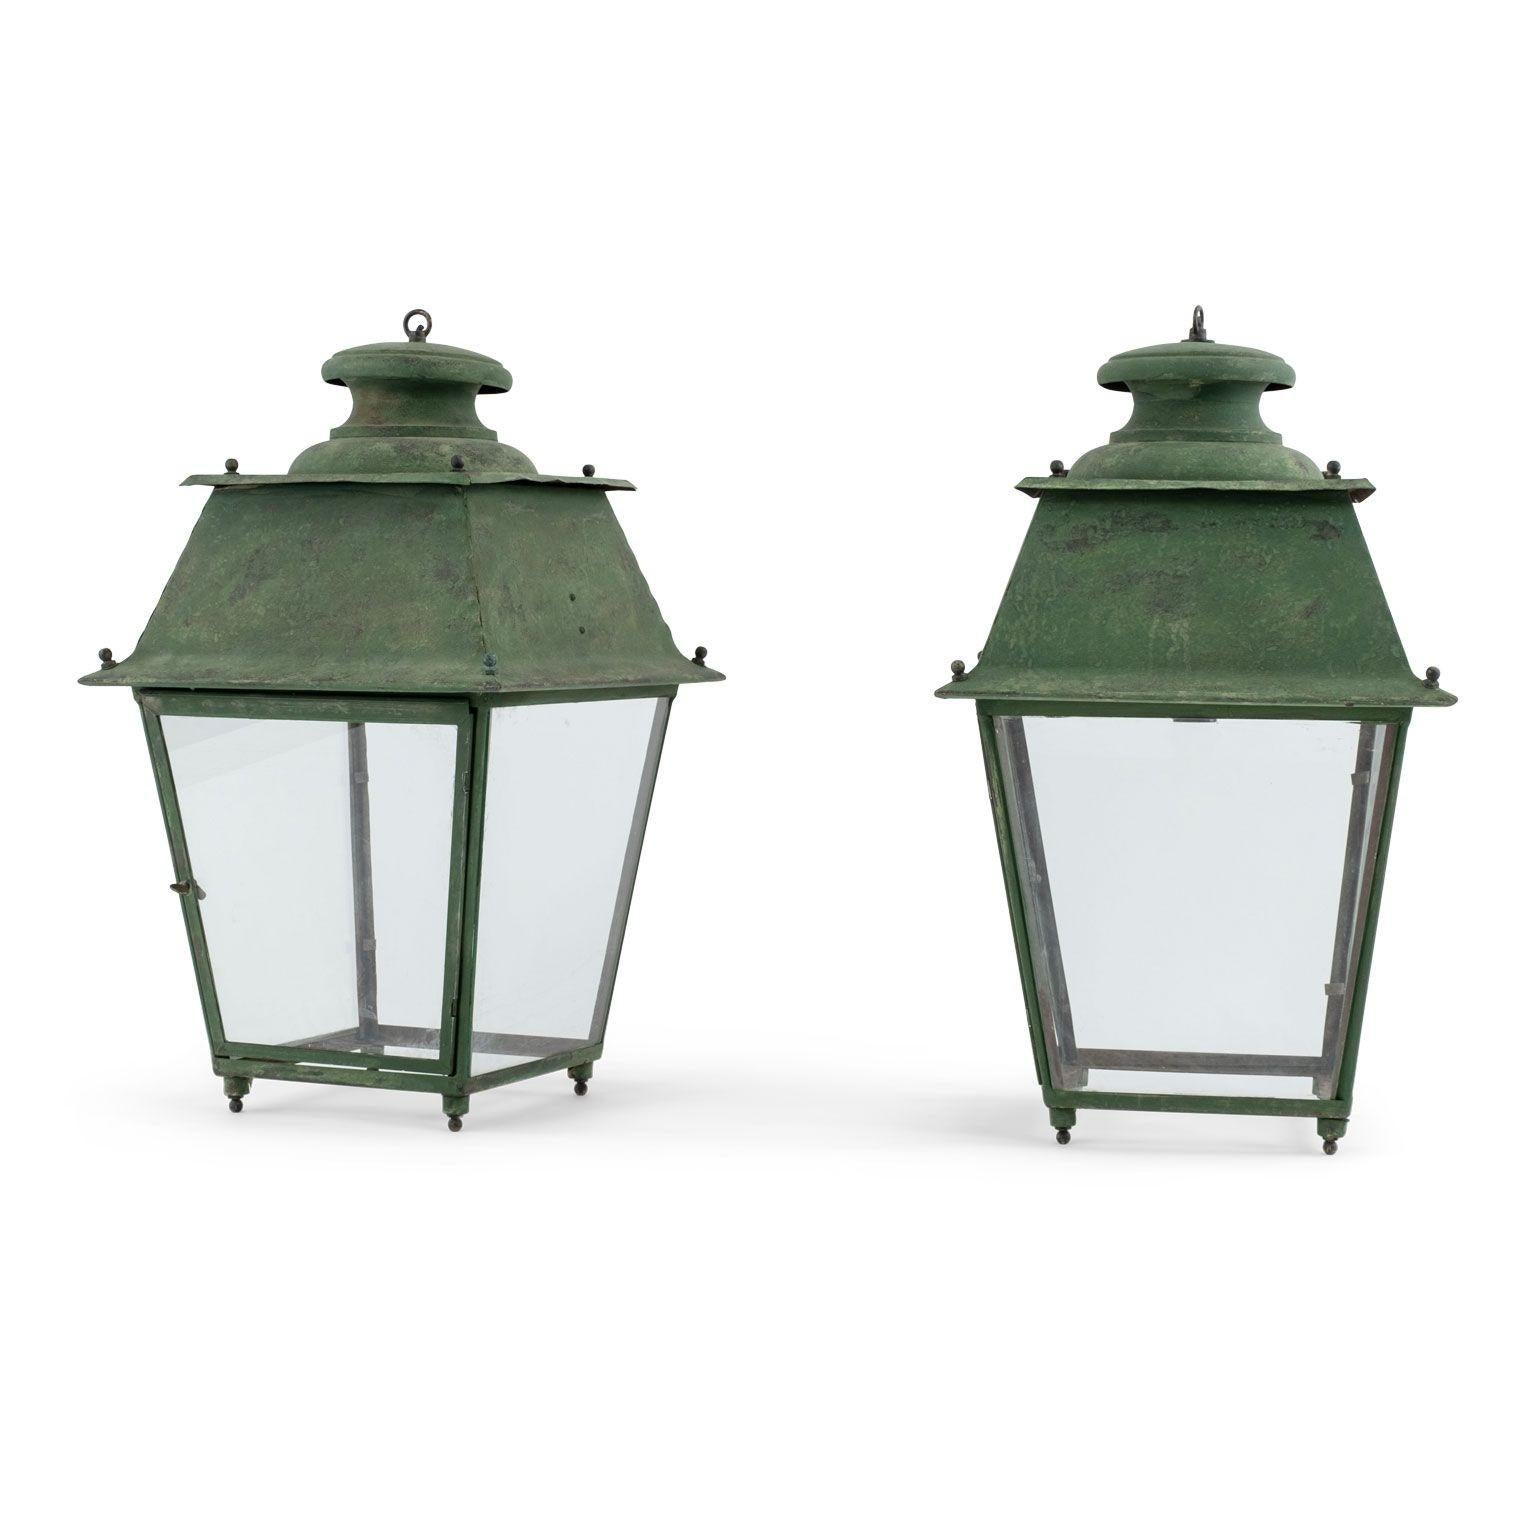 Pair of green-verdigris copper French lanterns, circa 1880-1919. Copper, tole and iron lantern with four glass paneled sides. Originally used as street or outdoor lanterns - now unwired. Can be wired, or fitted for use with gas, for additional cost.